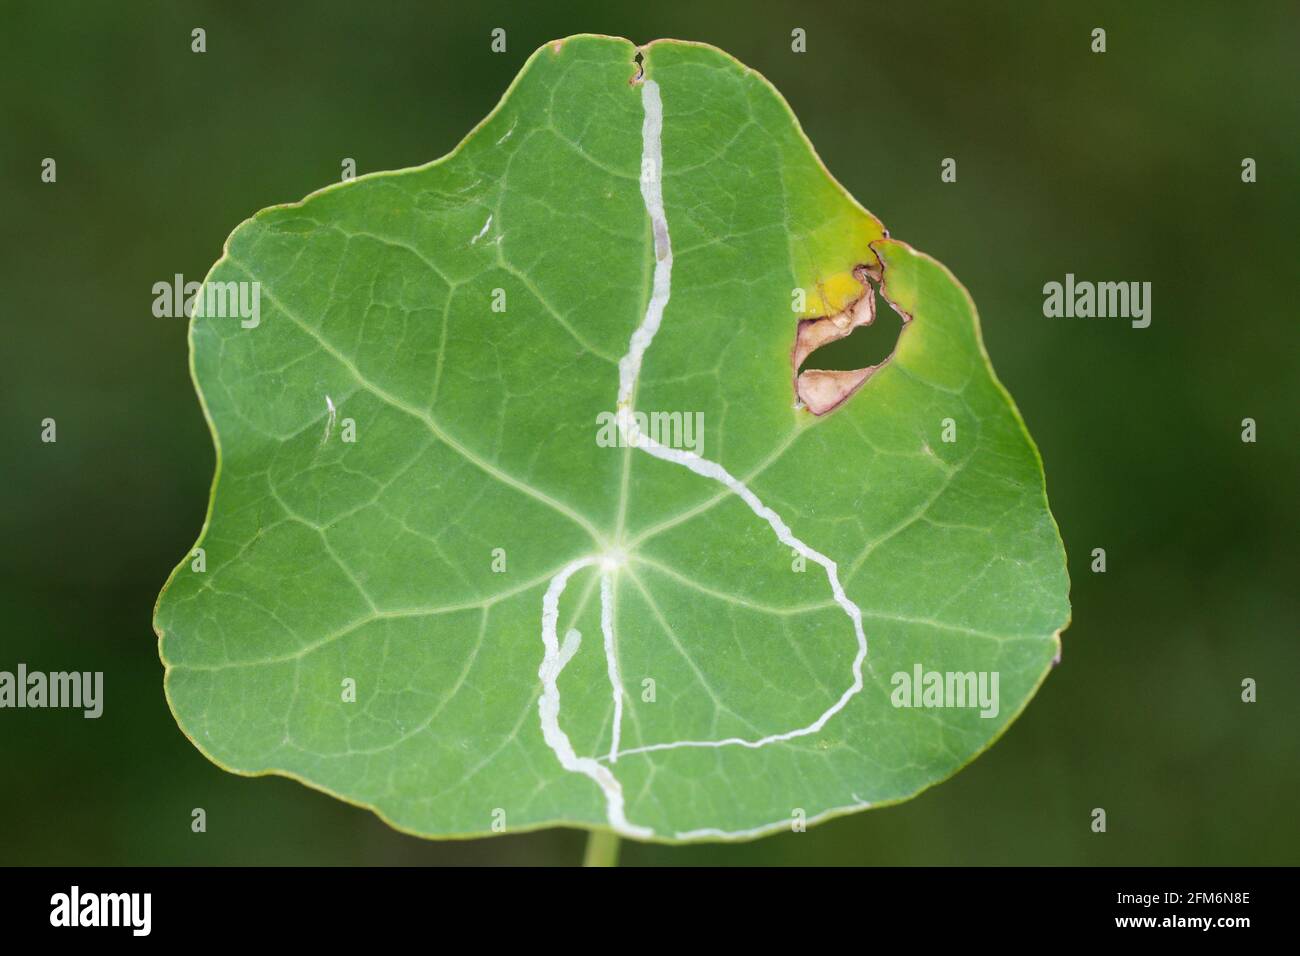 Liriomyza brassicae commonly known as the cabbage leafminer on nasturtium Tropaeolum leaf. It is a species of insect, a fly in the family Agromyzidae. Stock Photo